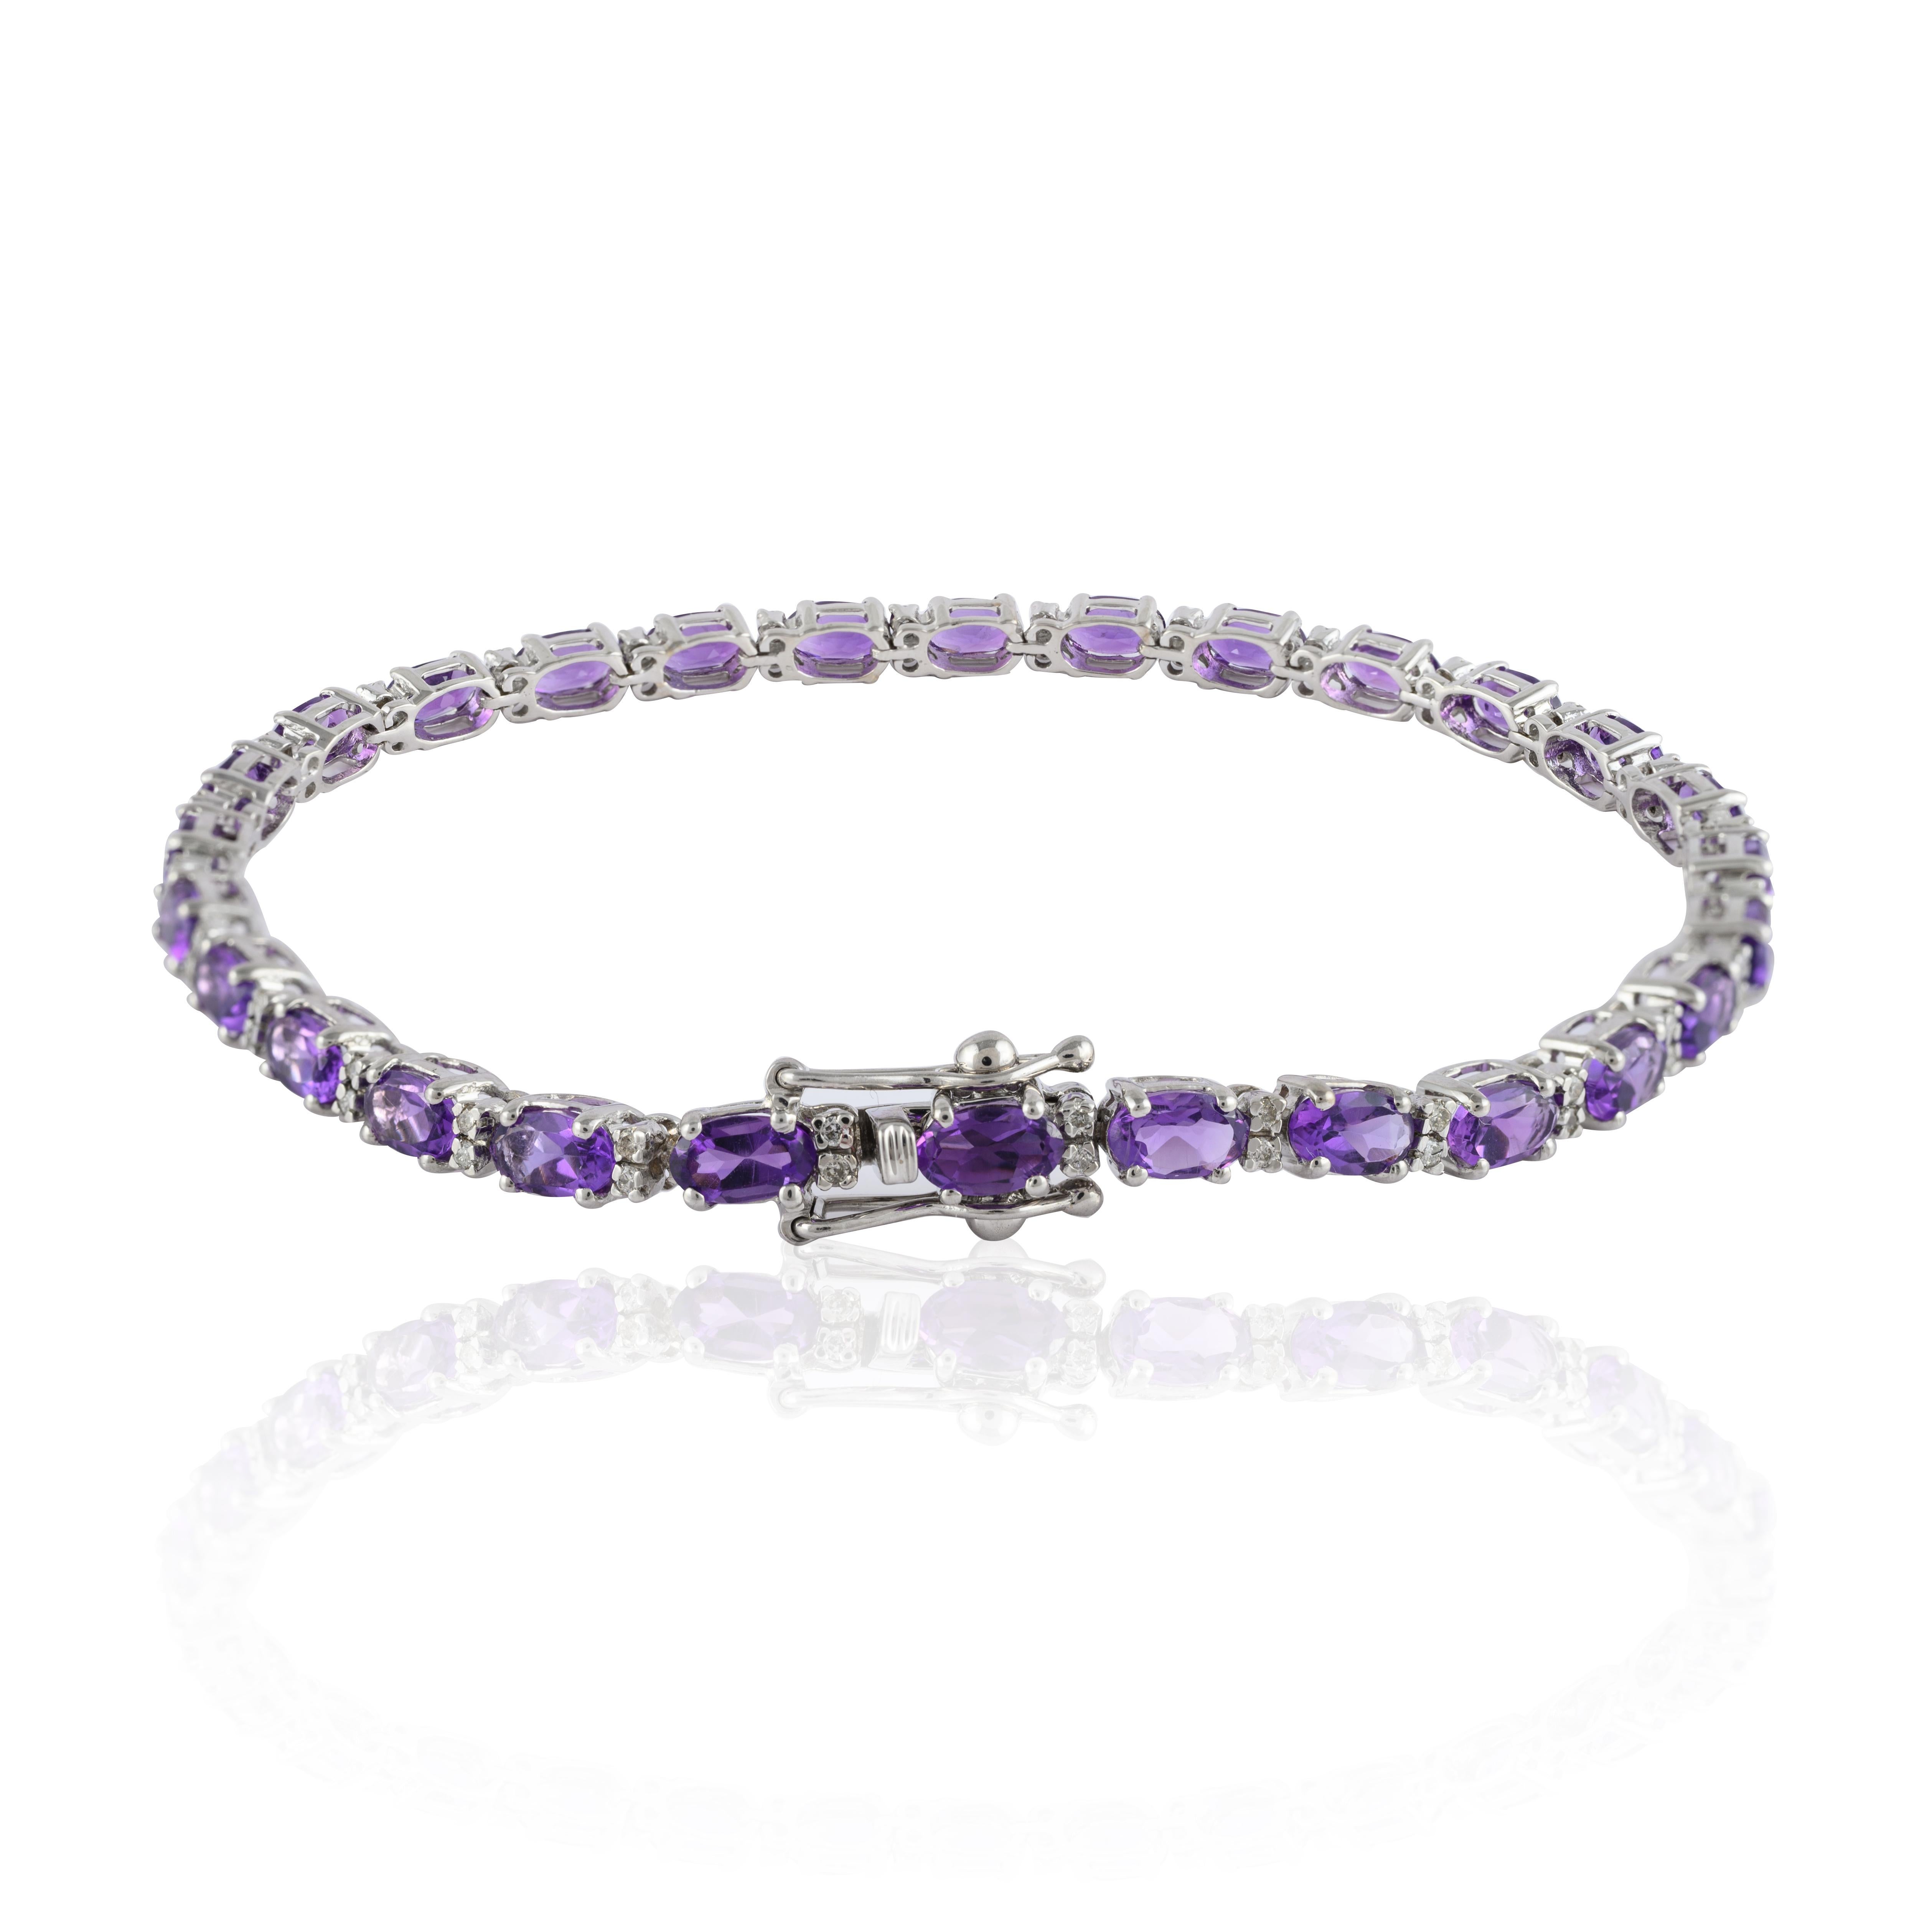 This Amethyst Tennis Bracelet with Diamonds in 14K gold showcases 28 endlessly sparkling natural amethyst, weighing 5.65 carat. It measures 7 inches long in length. 
Amethyst is a protective stone that helps to reduce stress and anxiety in your